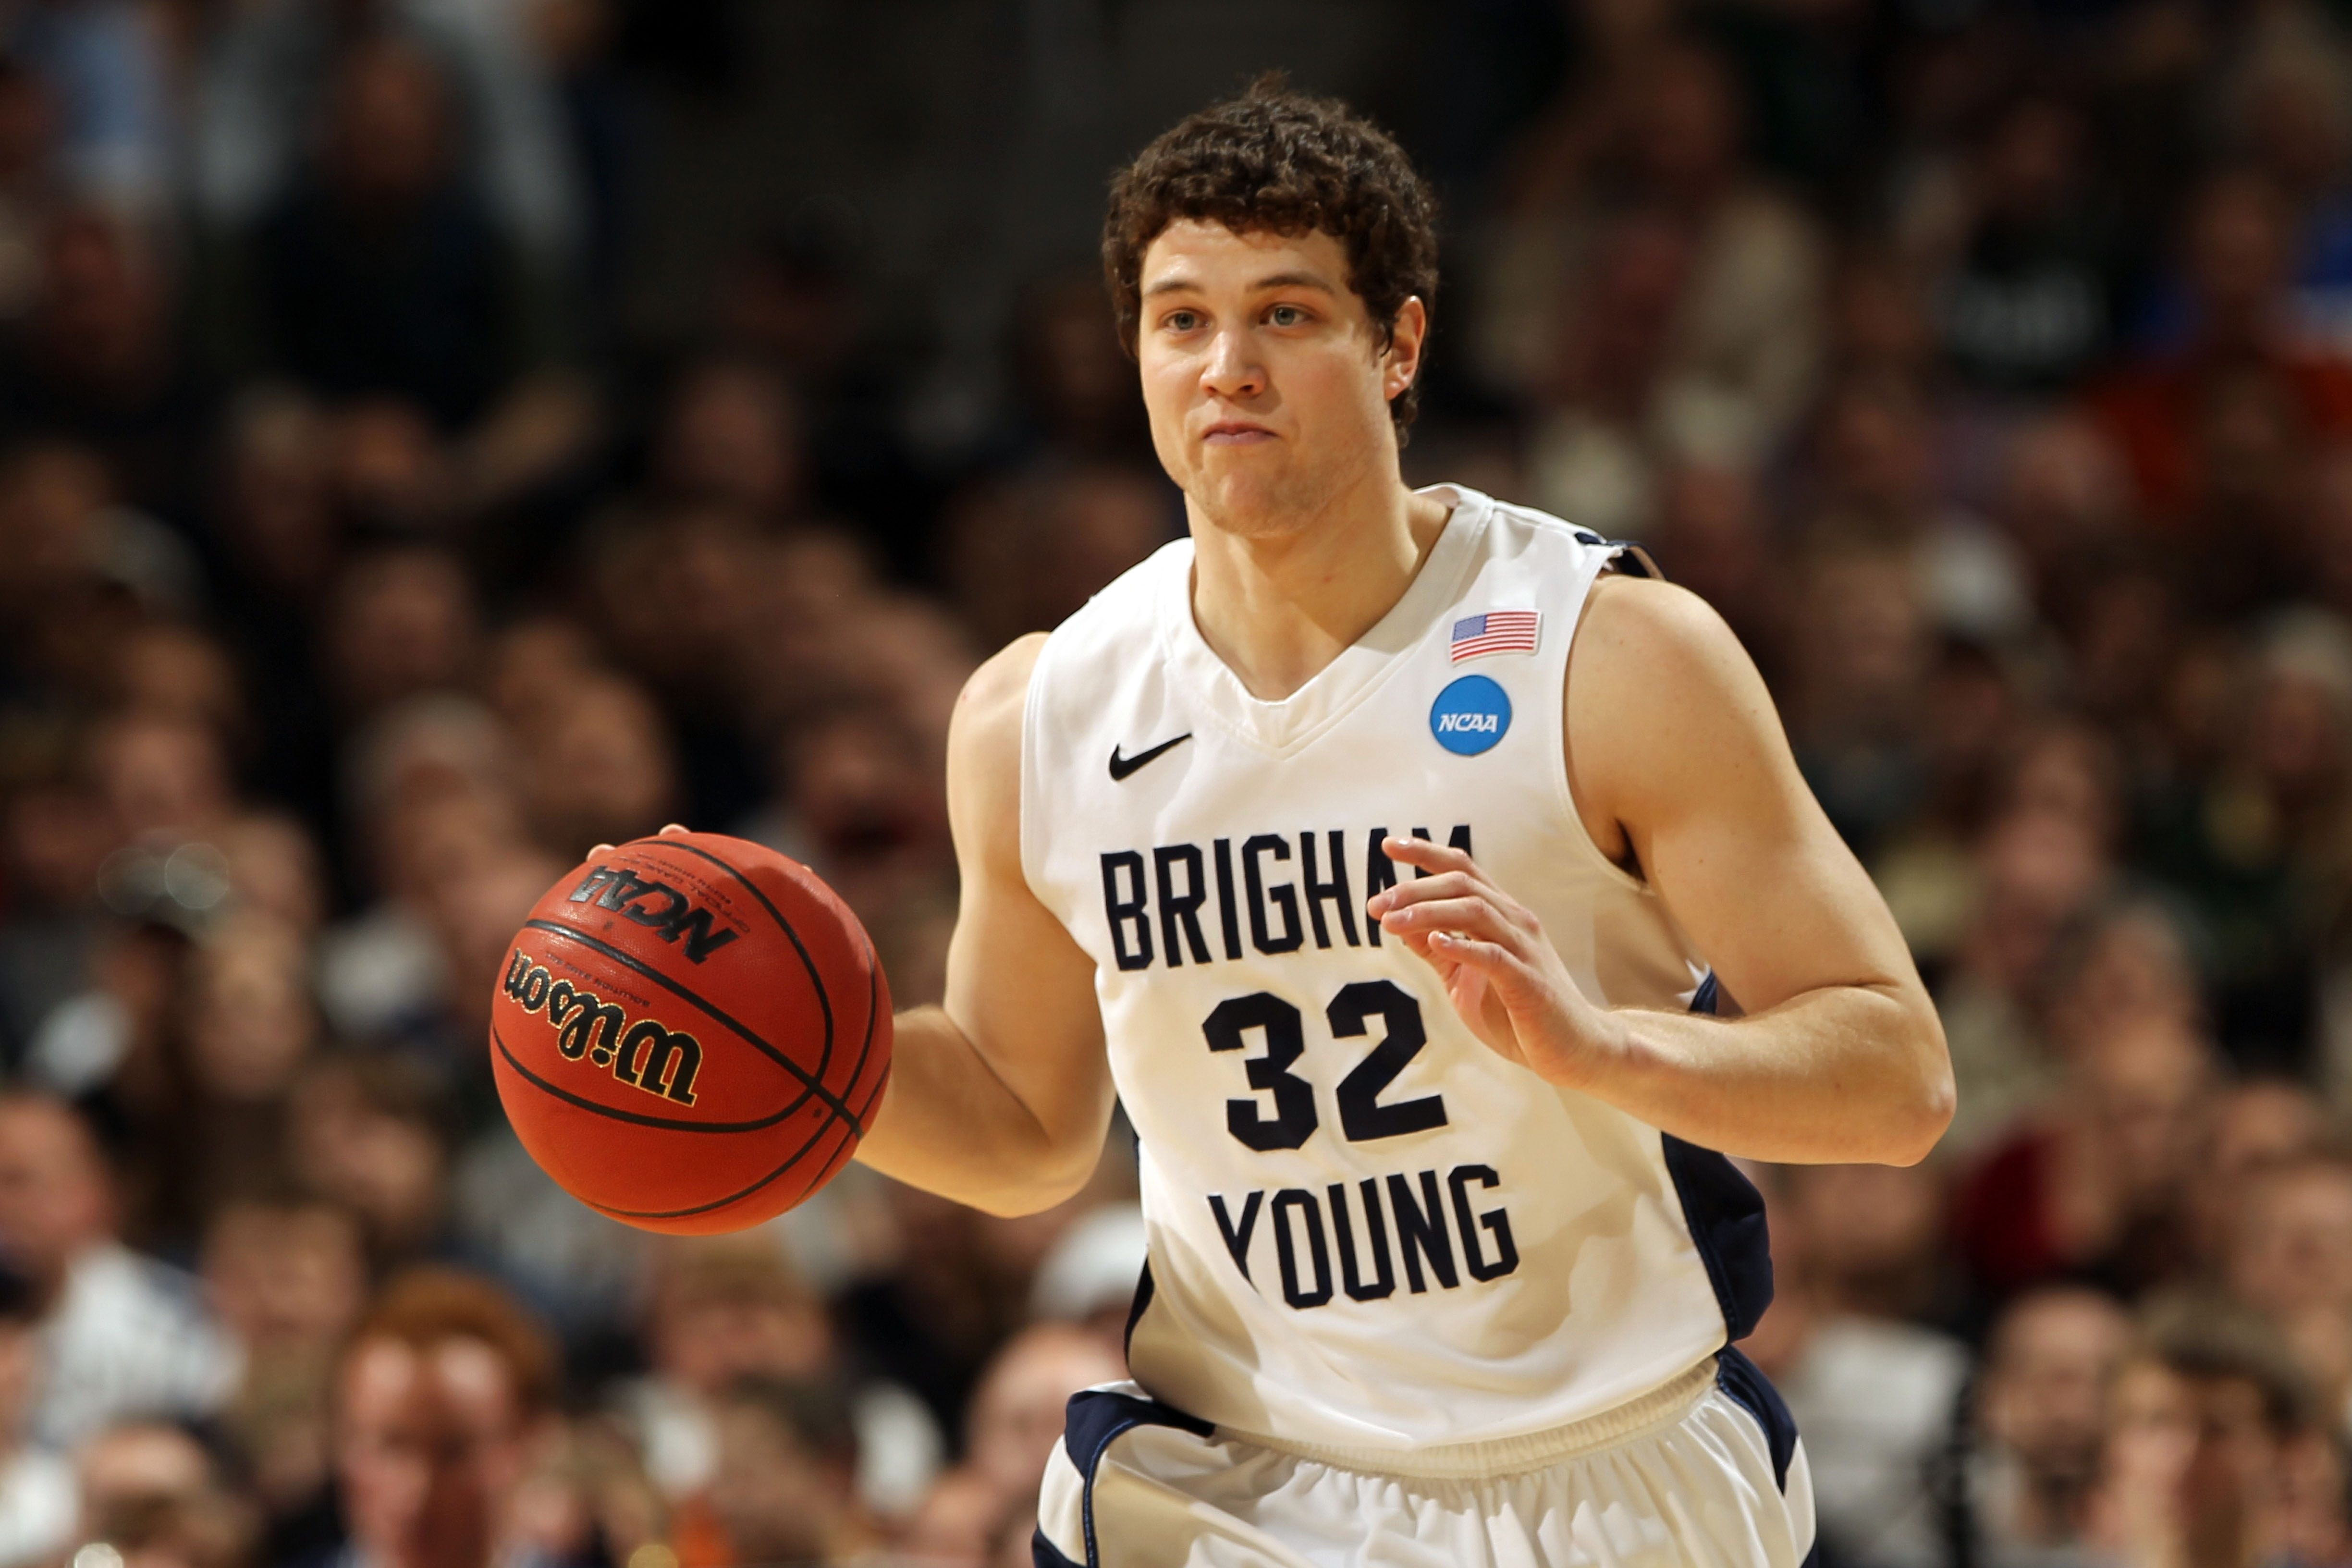 Jimmer Fredette took the basketball by storm with his effortless range at BYU, but he didn't live up to the hype in the NBA. Where is he now?